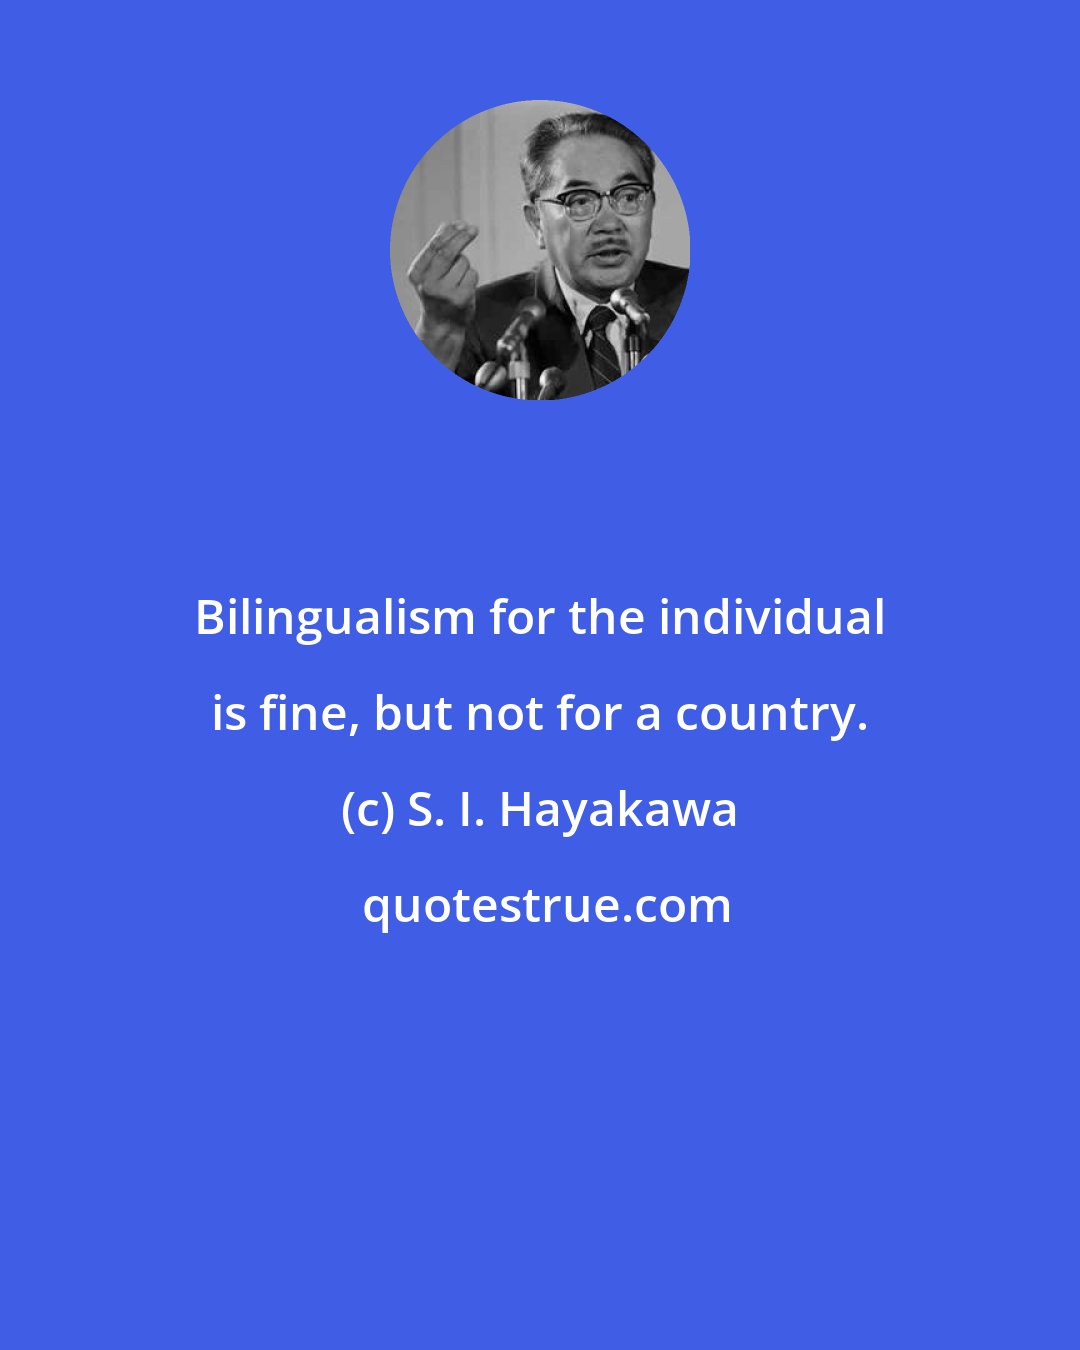 S. I. Hayakawa: Bilingualism for the individual is fine, but not for a country.